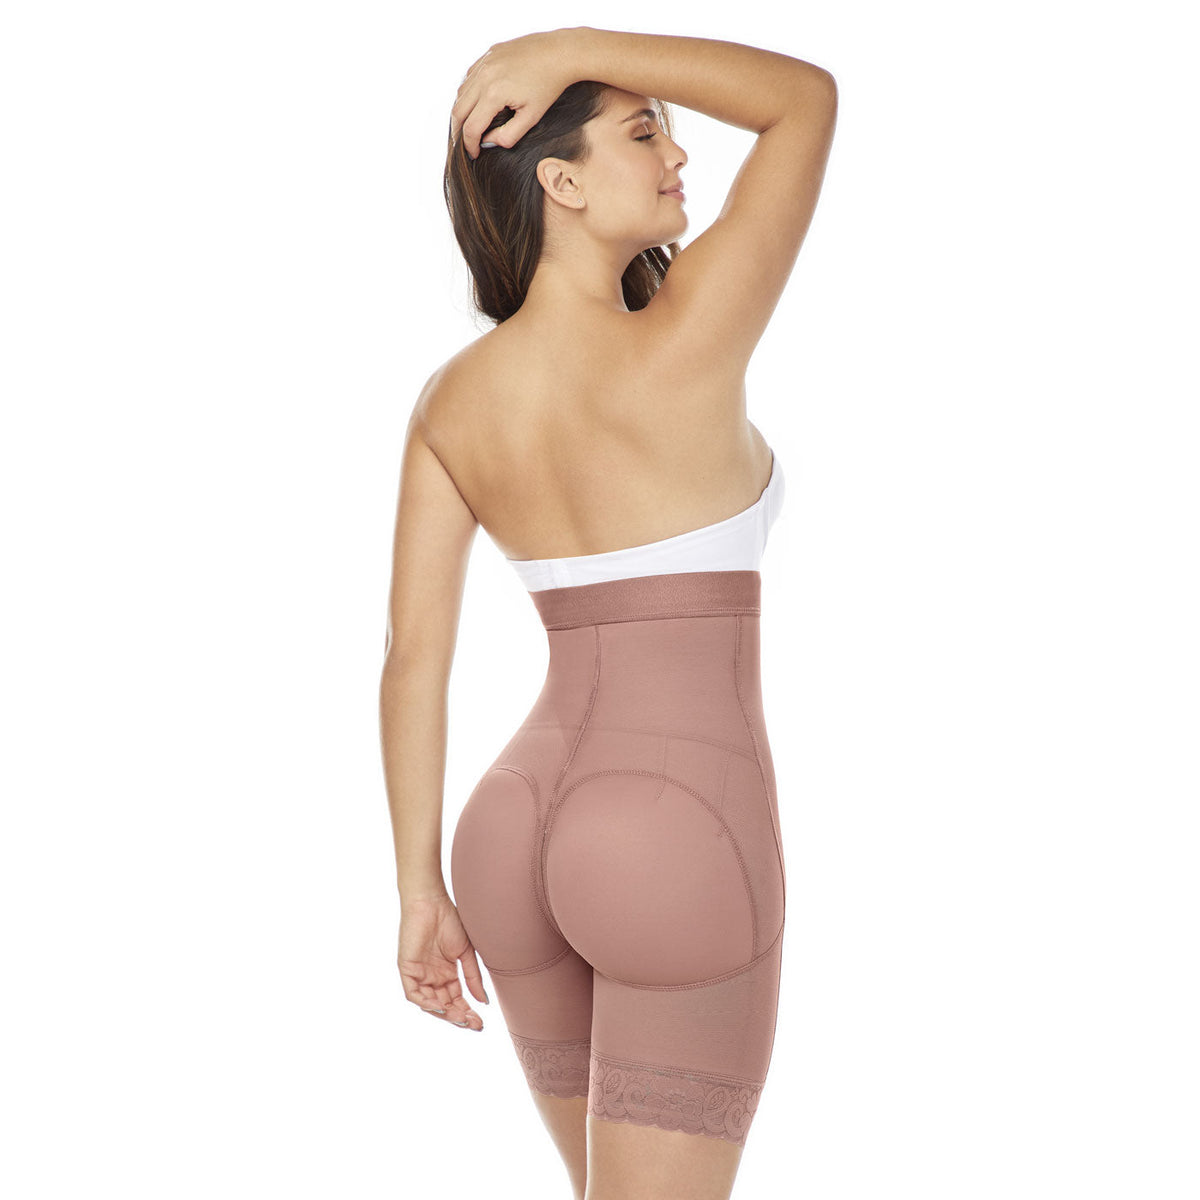 MariaE Fajas - Girdles, Body Shapers and Shorts